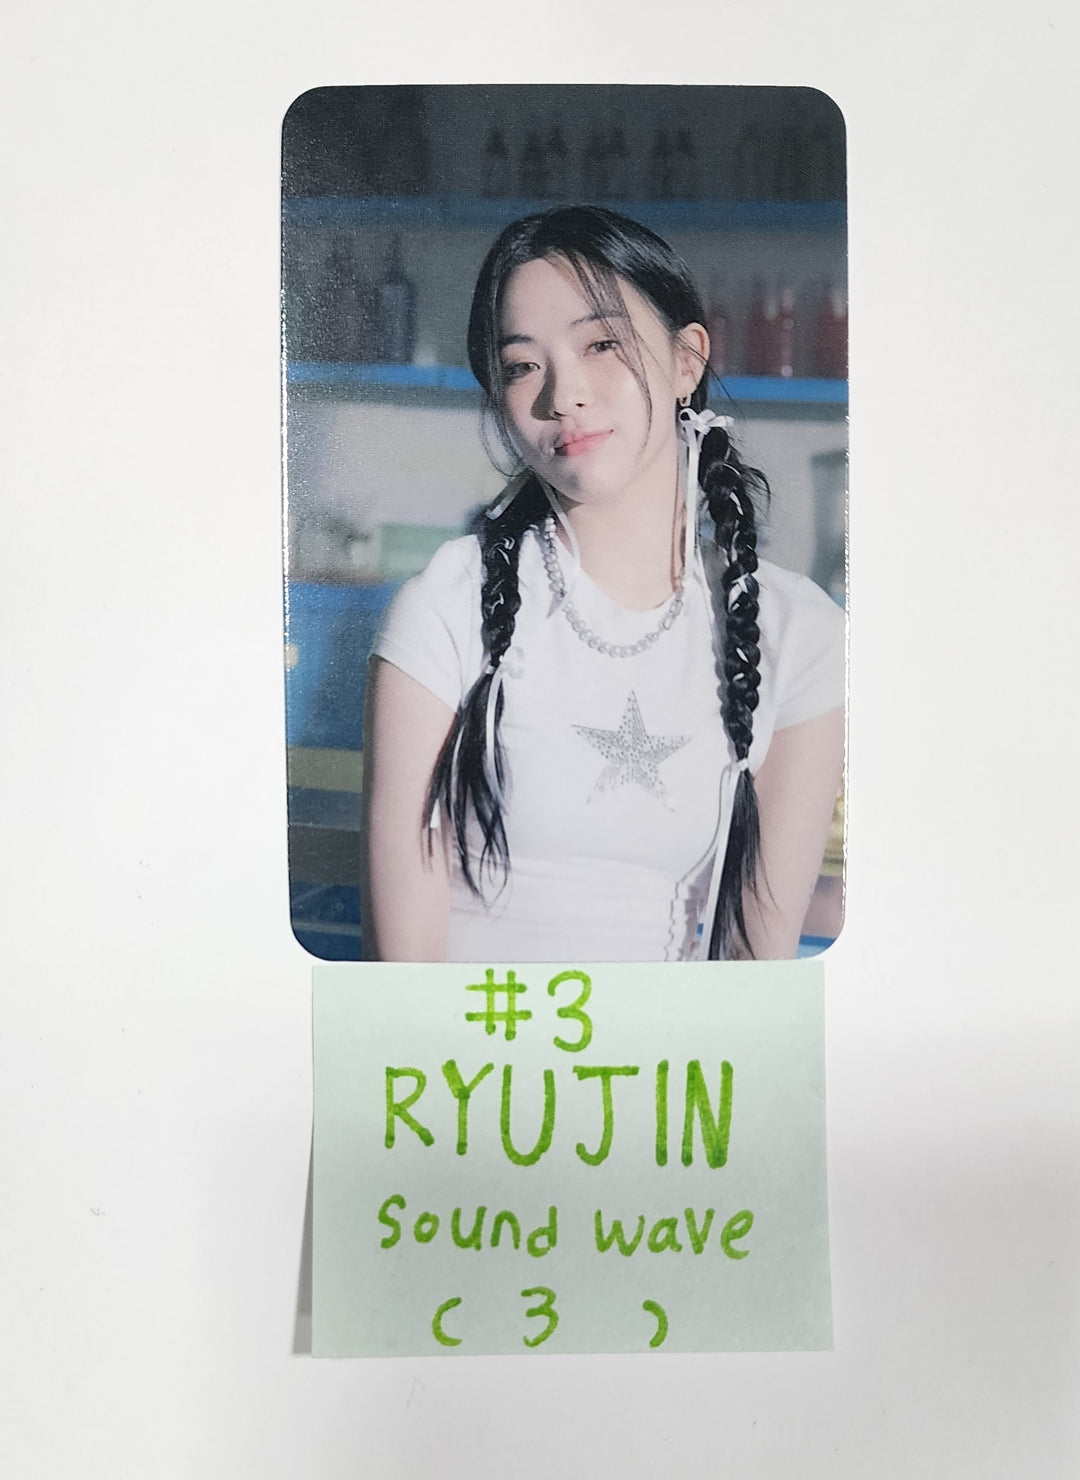 ITZY "KILL MY DOUBT" - Soundwave Fansign Event Photocard Round 3